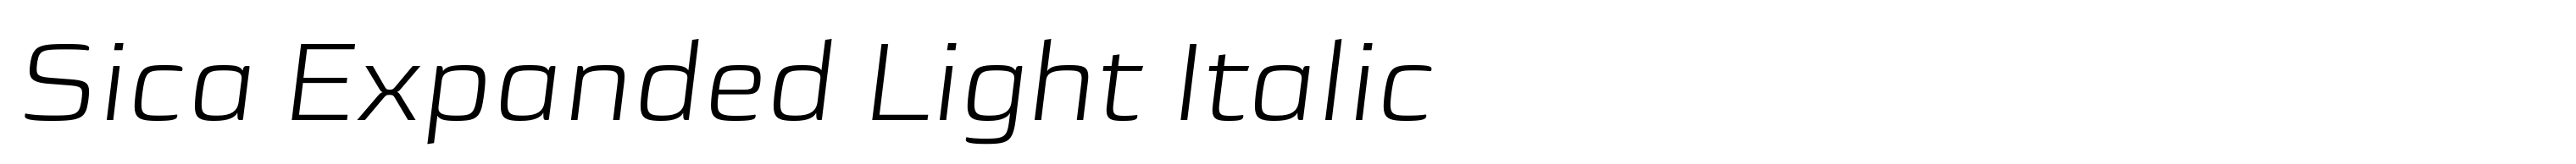 Sica Expanded Light Italic